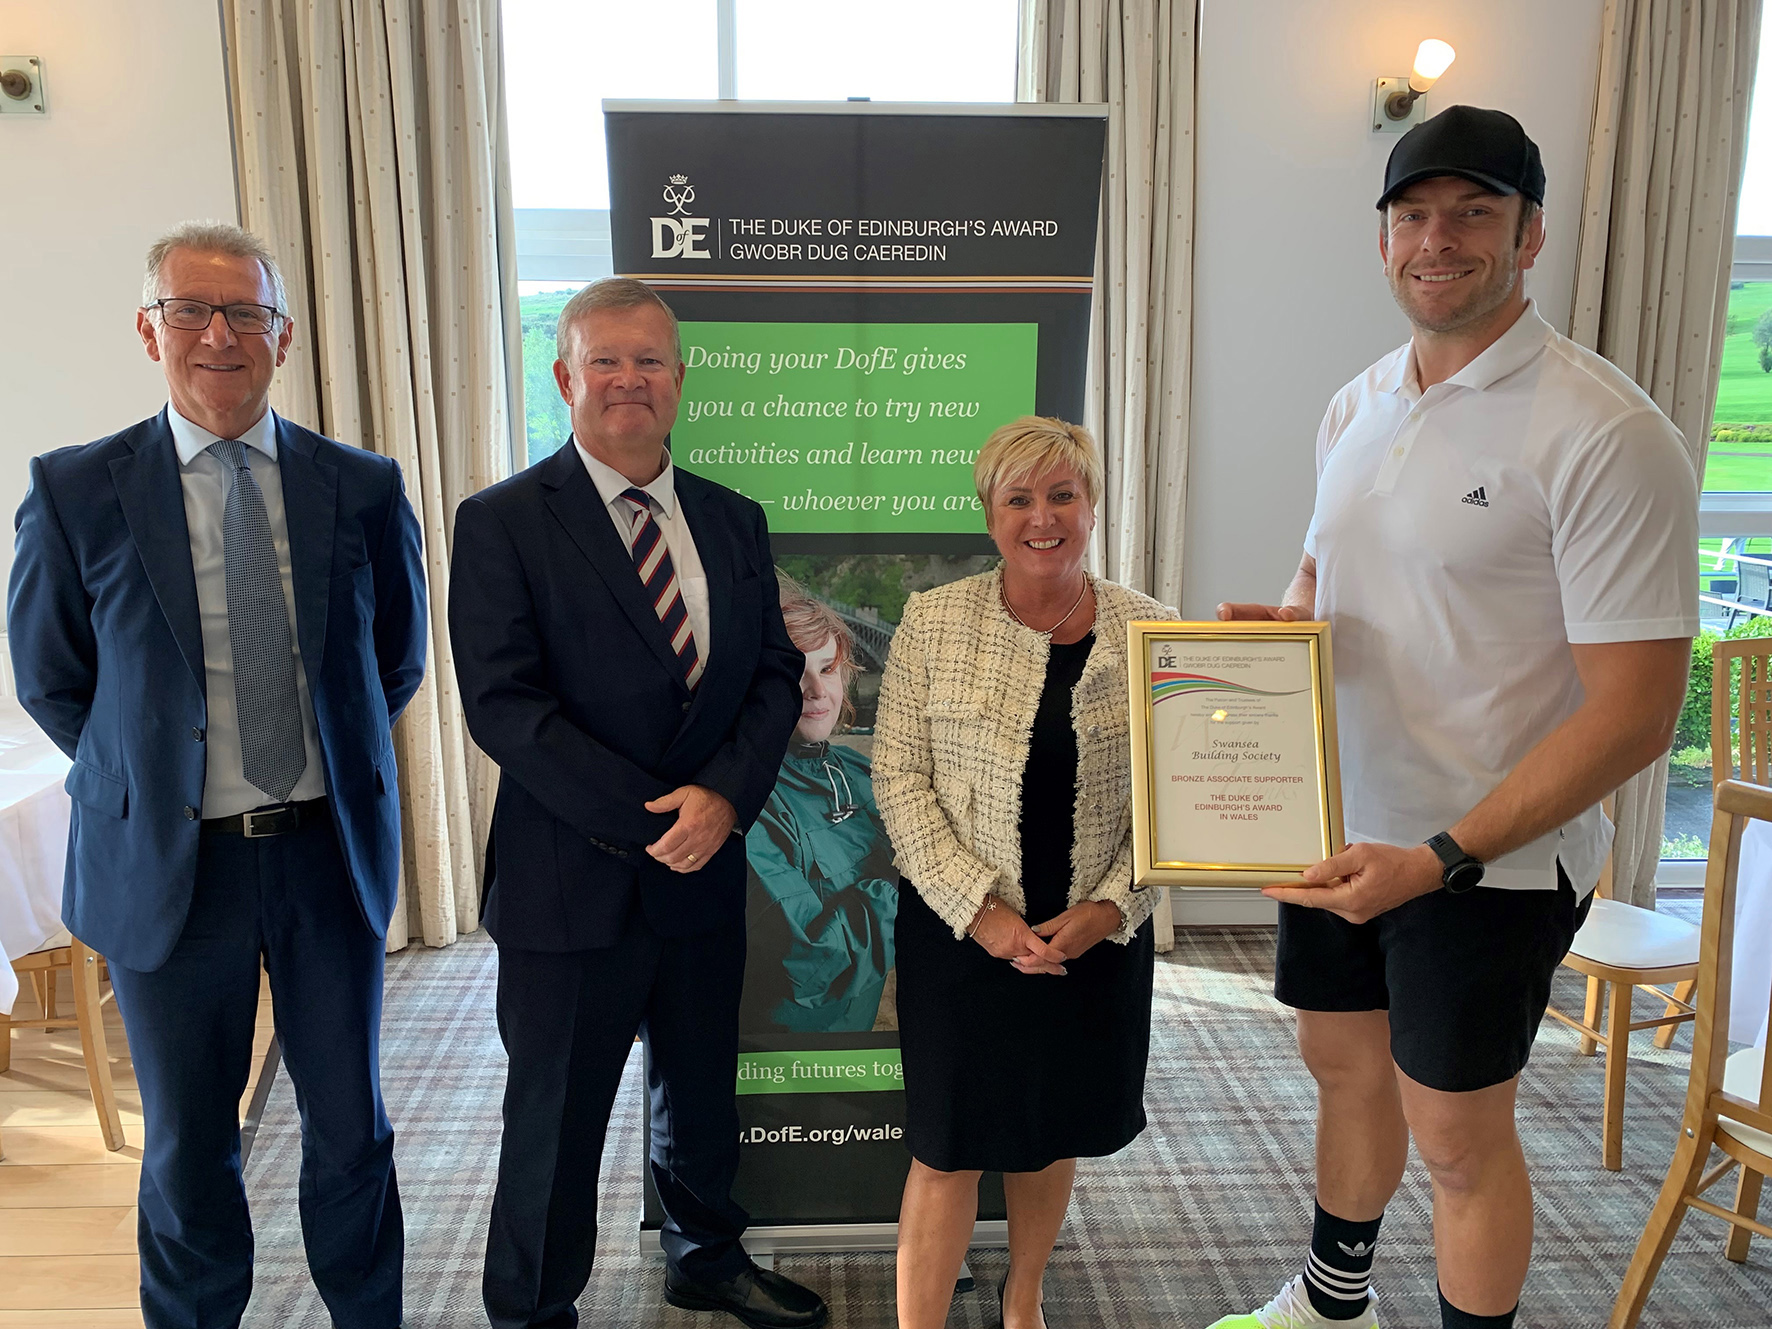 Golfers club together to raise record funds for DofE Wales